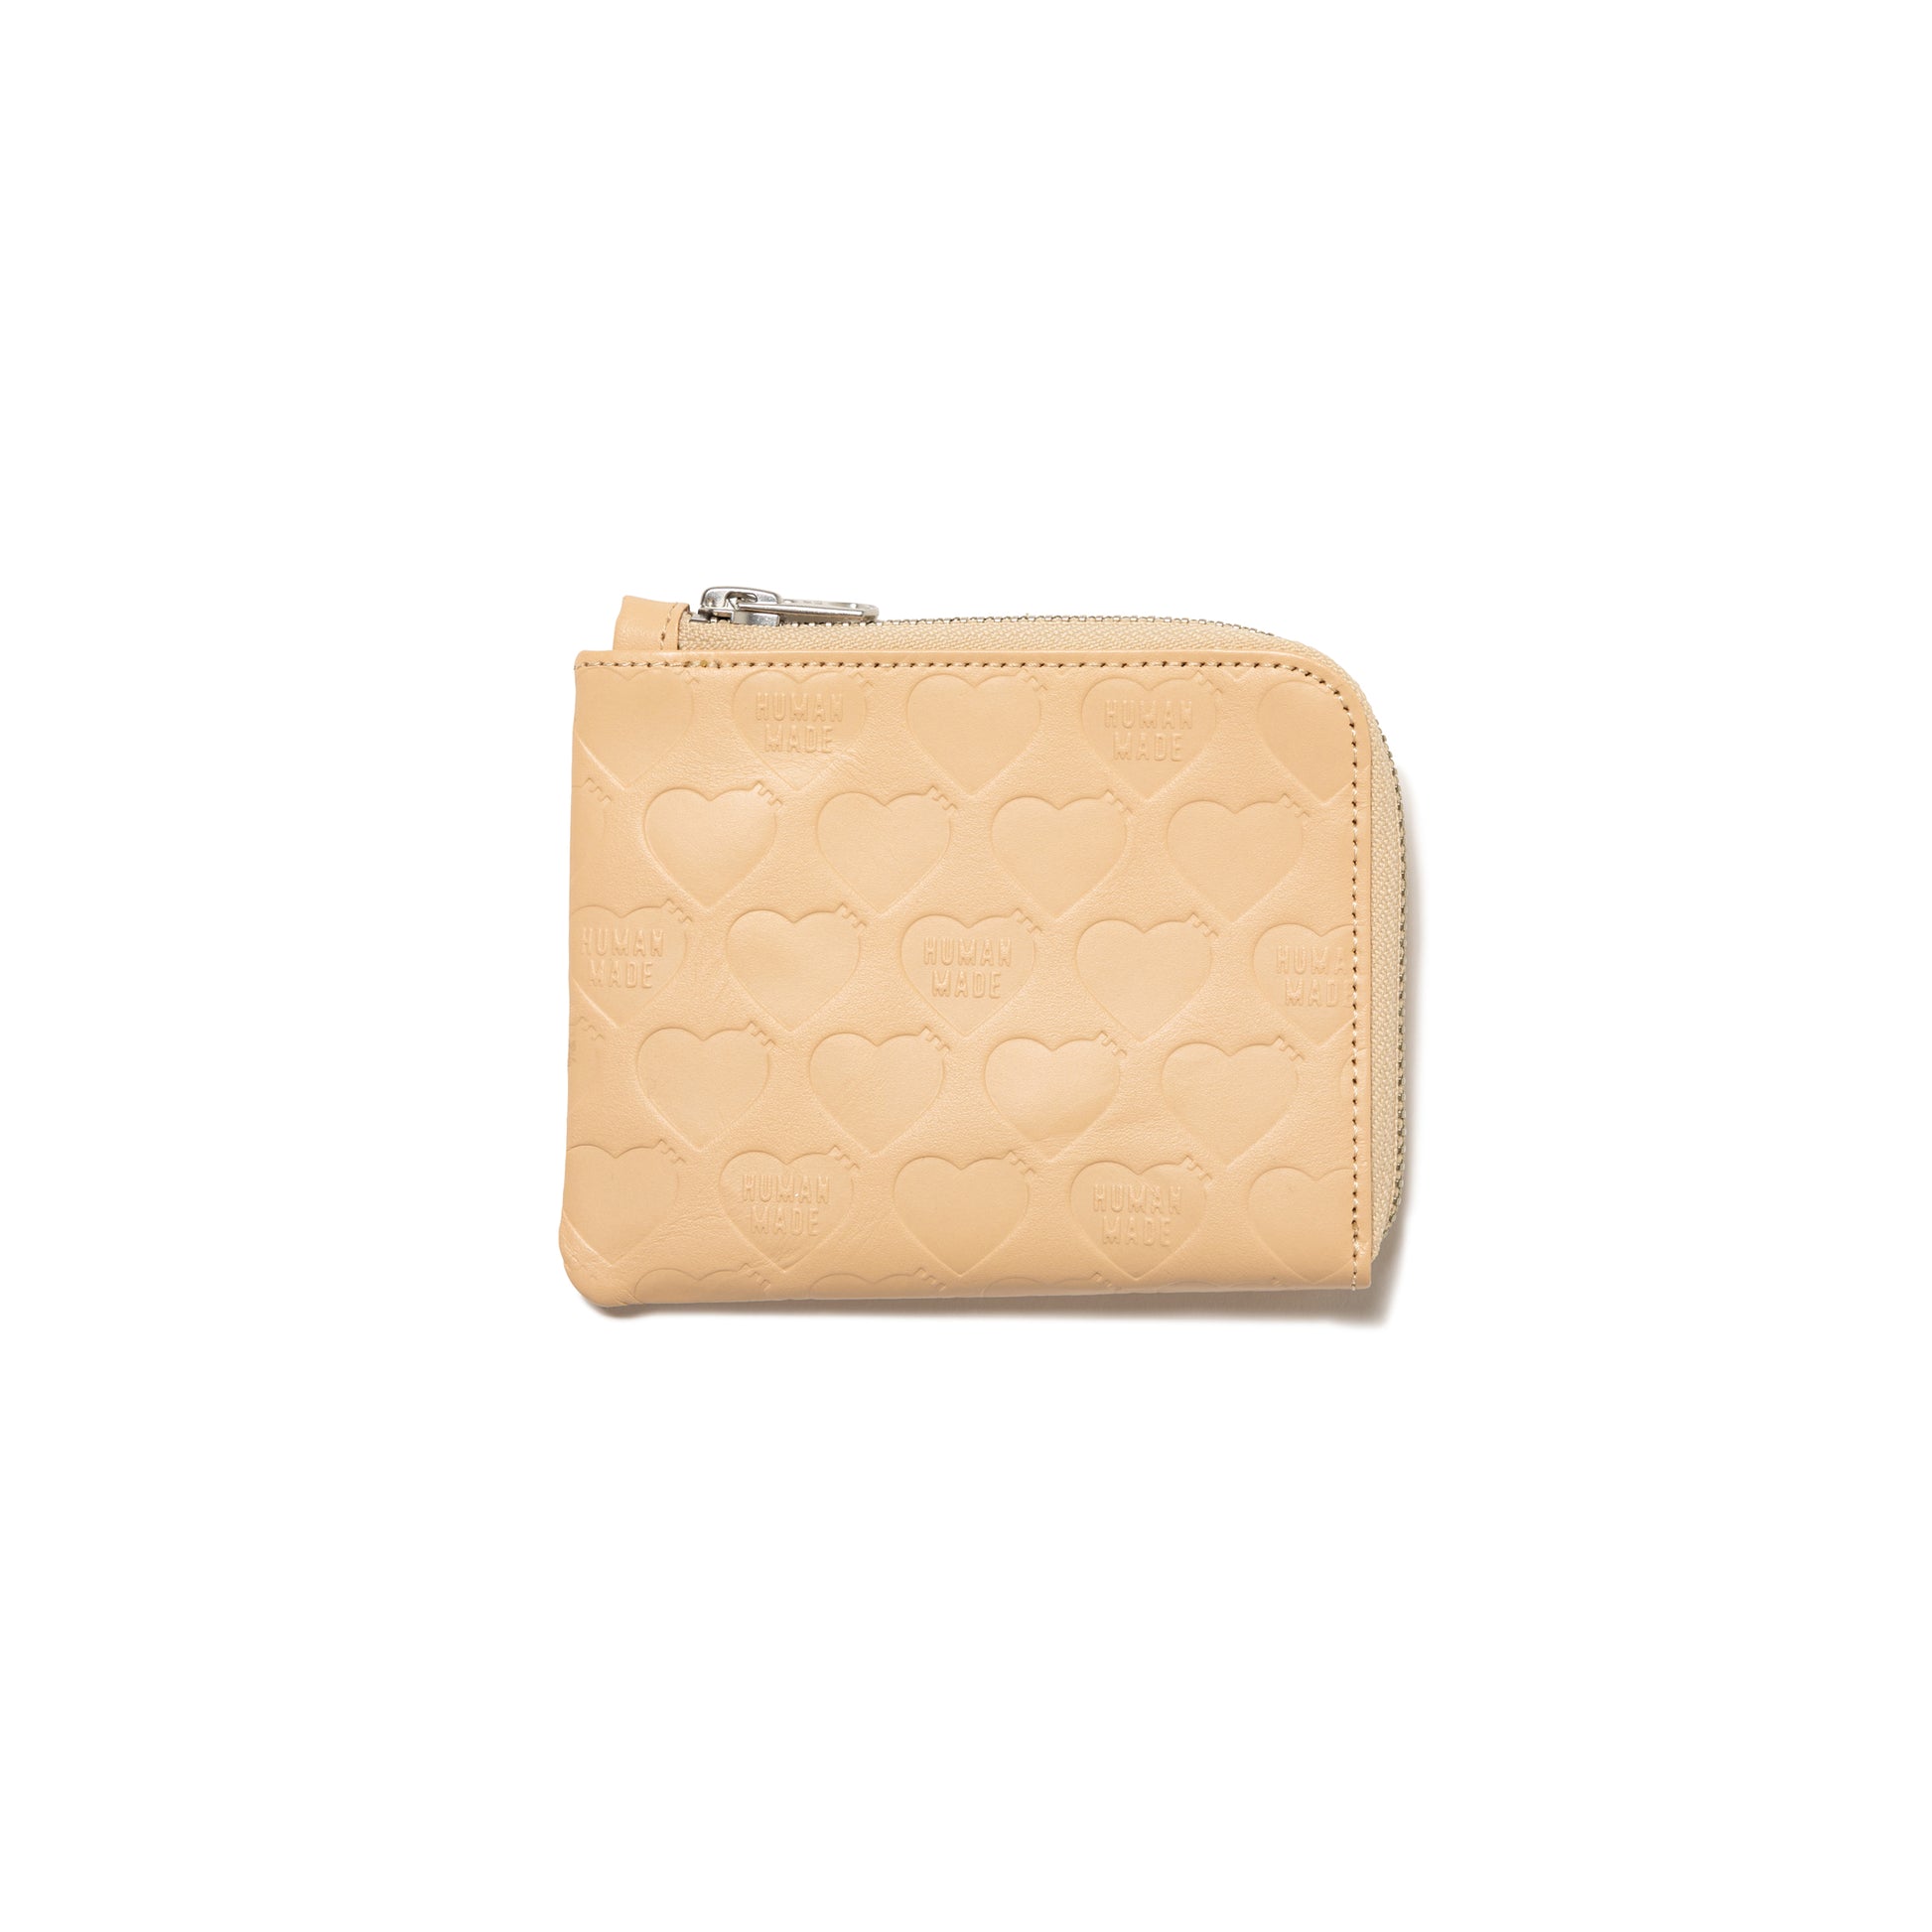 HUMAN MADE LEATHER WALLET BEIGE | bliss-spafizioterapi.com